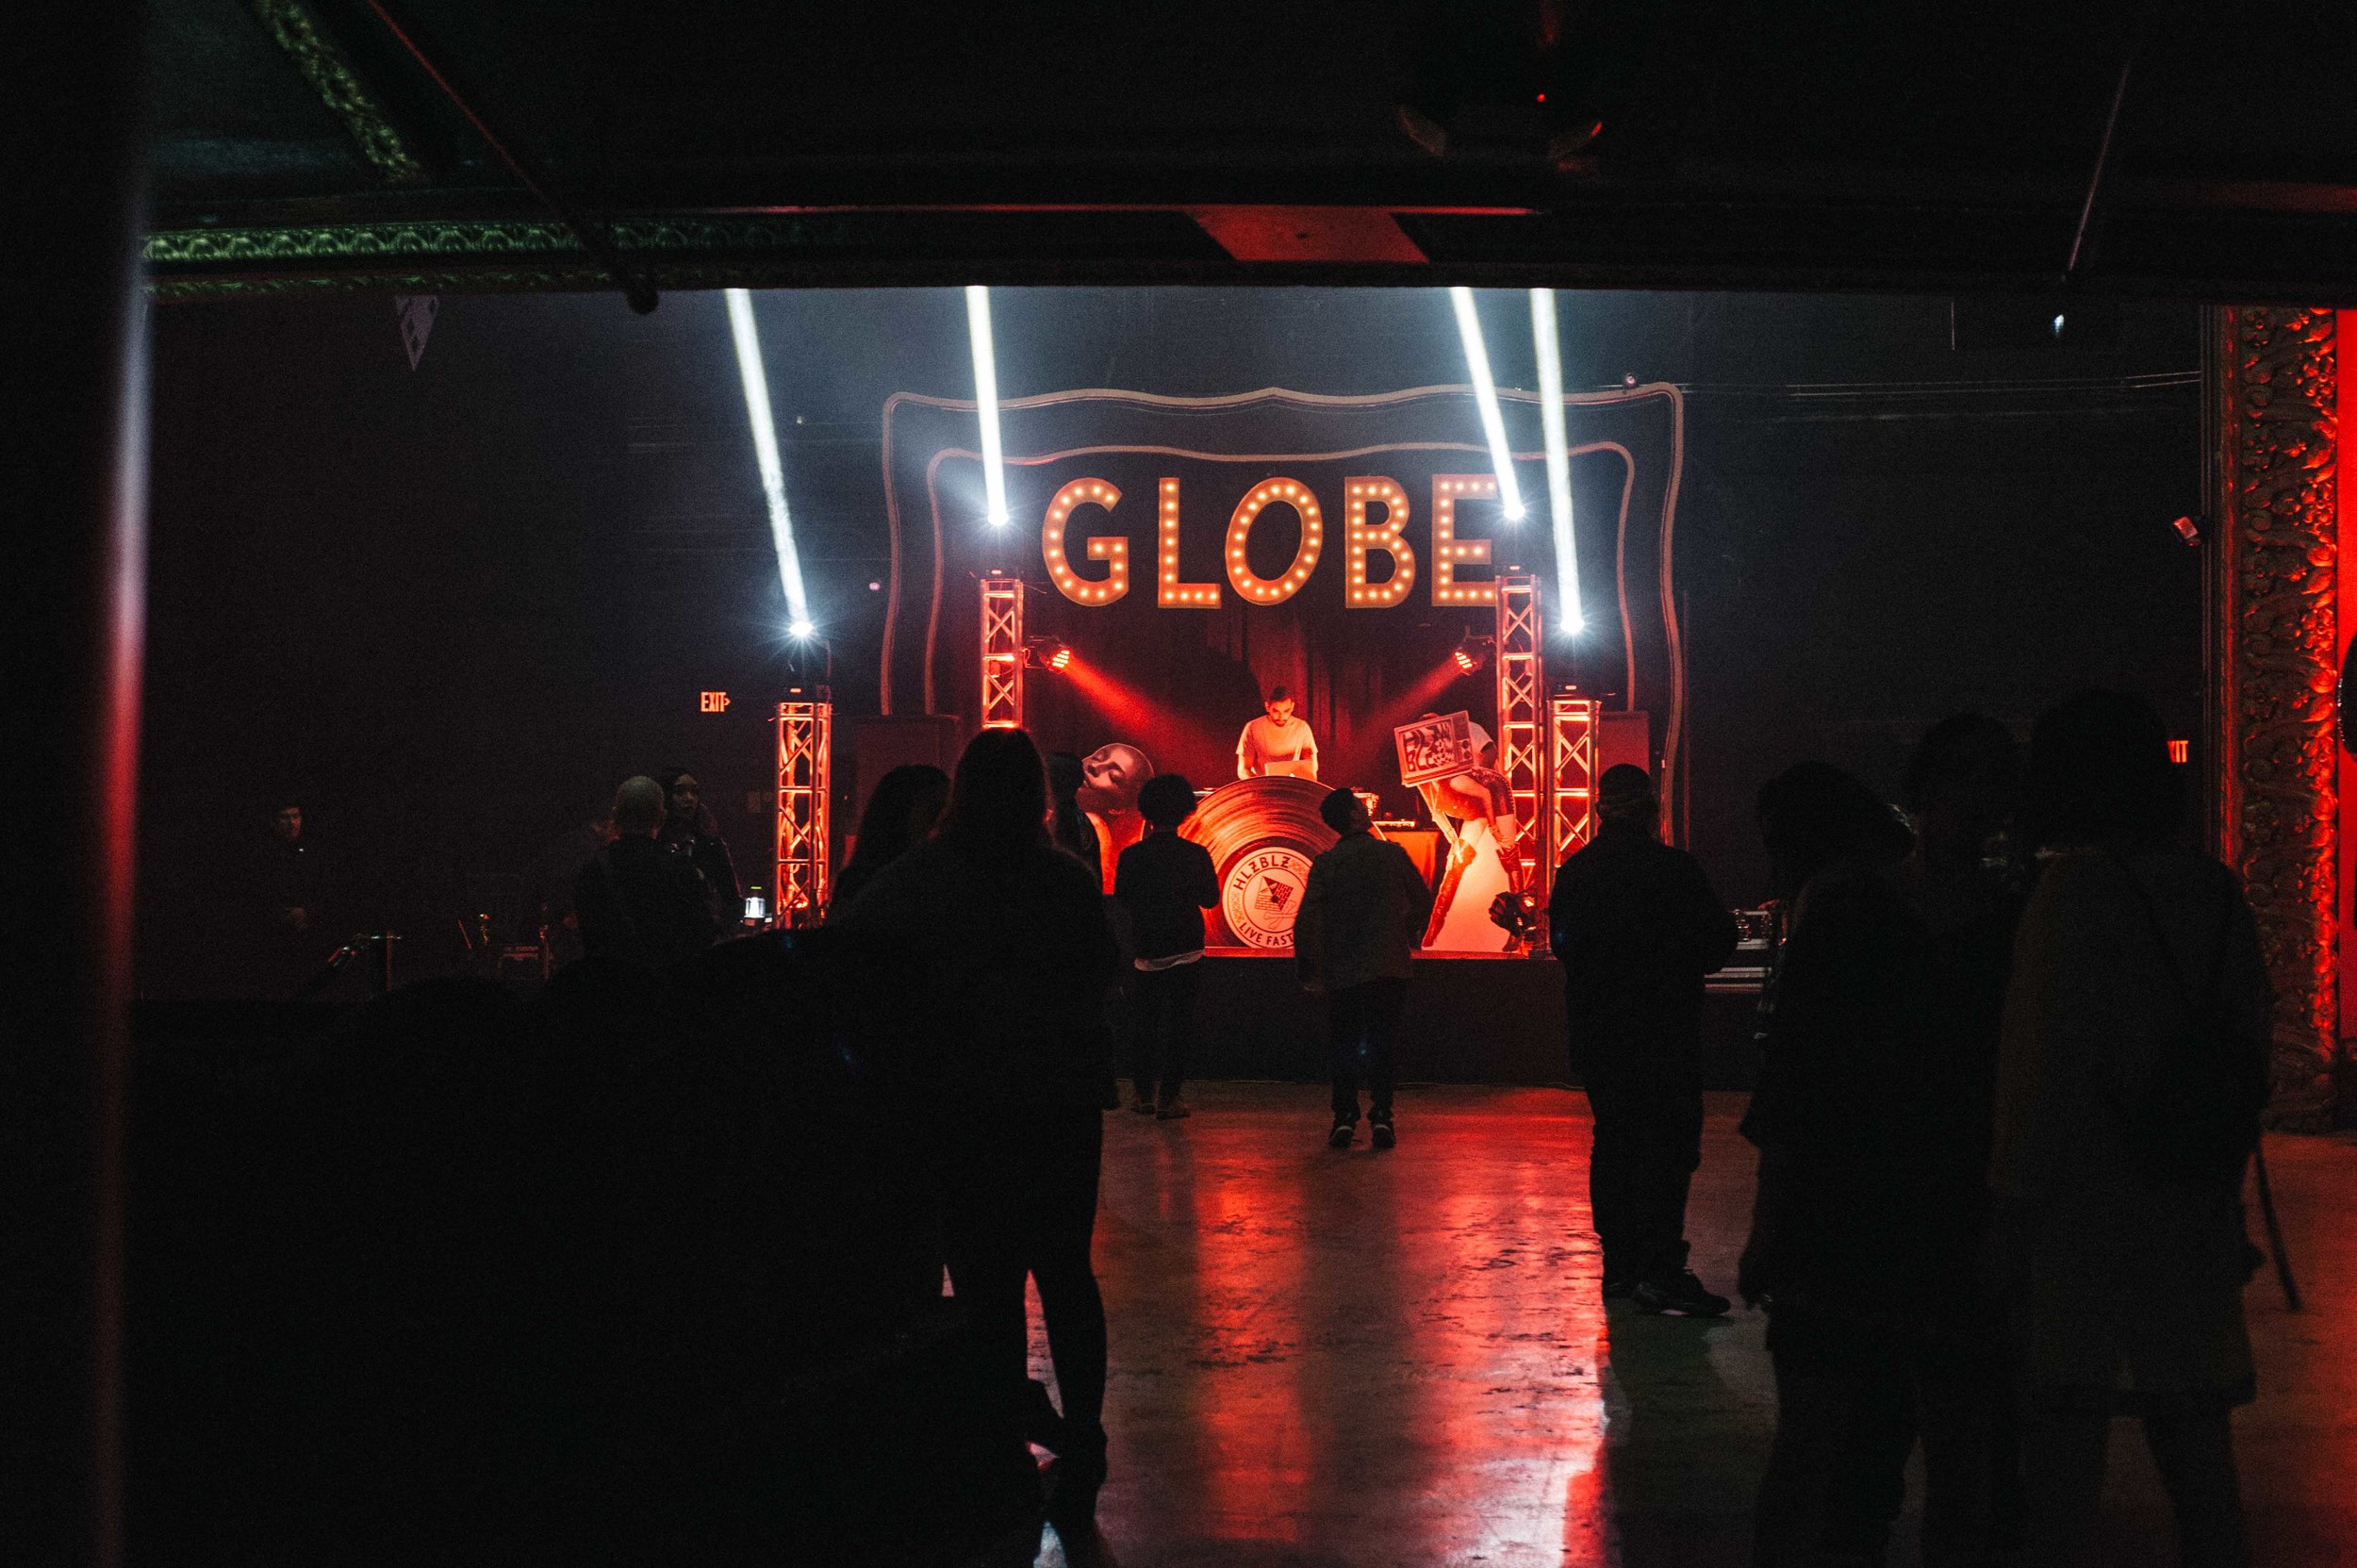  Center stage at Globe Theater at the ISSUE 06 Launch x HLZBLZ 10Year Anniversary (Feb 11). / Photo: © Jordan Abapo for SUSPEND Magazine 